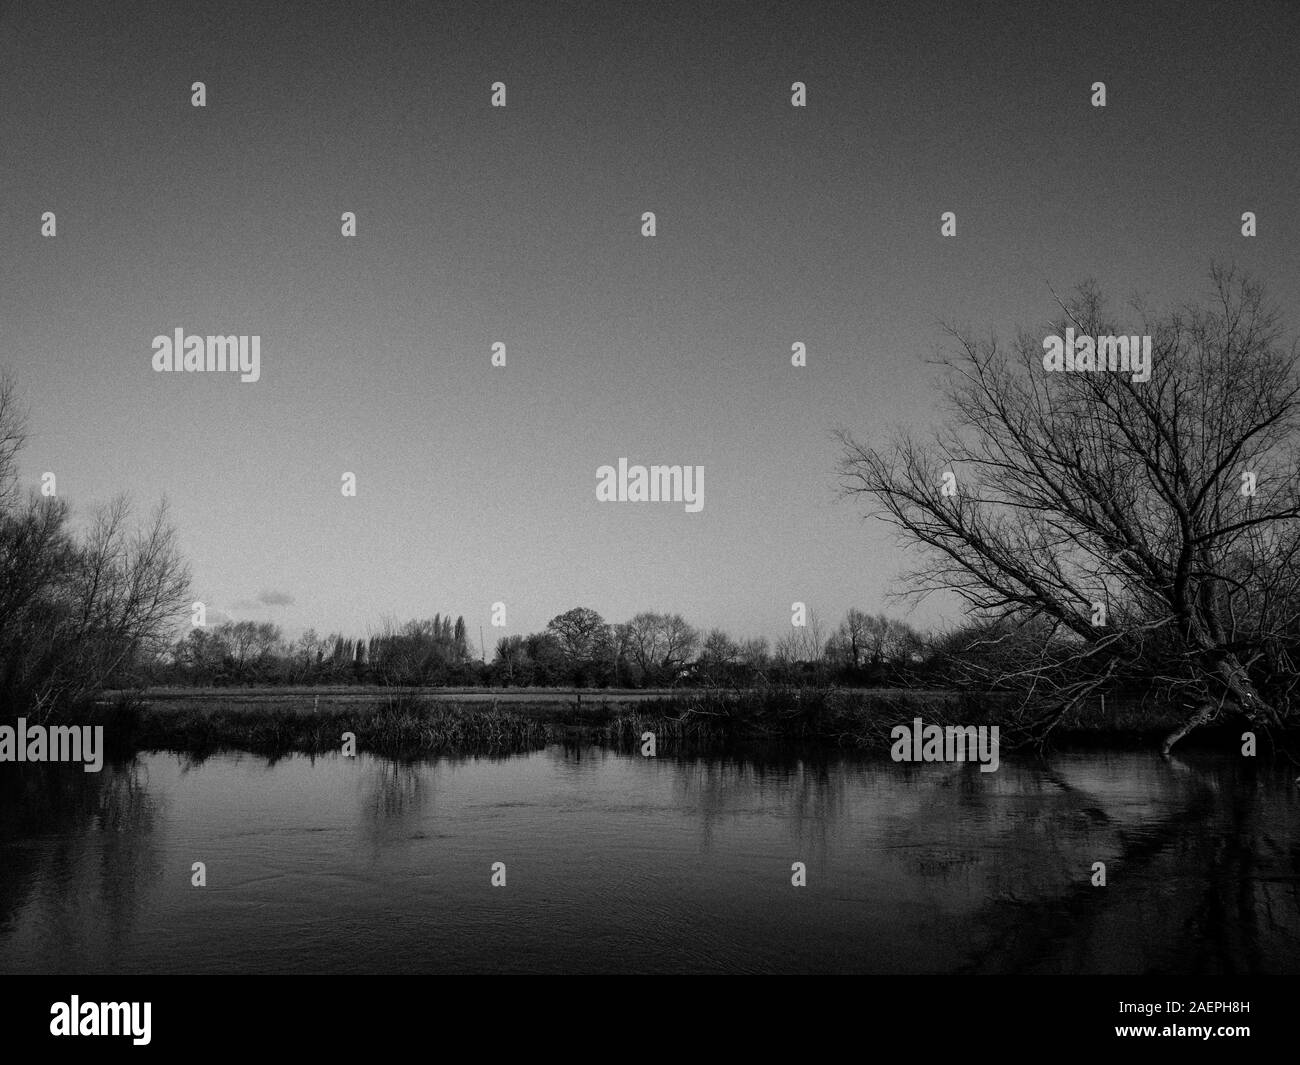 Black and White Landscape of River Cherwell, Oxford University Parks, Oxford, Oxfordshire, England, UK, GB. Stock Photo